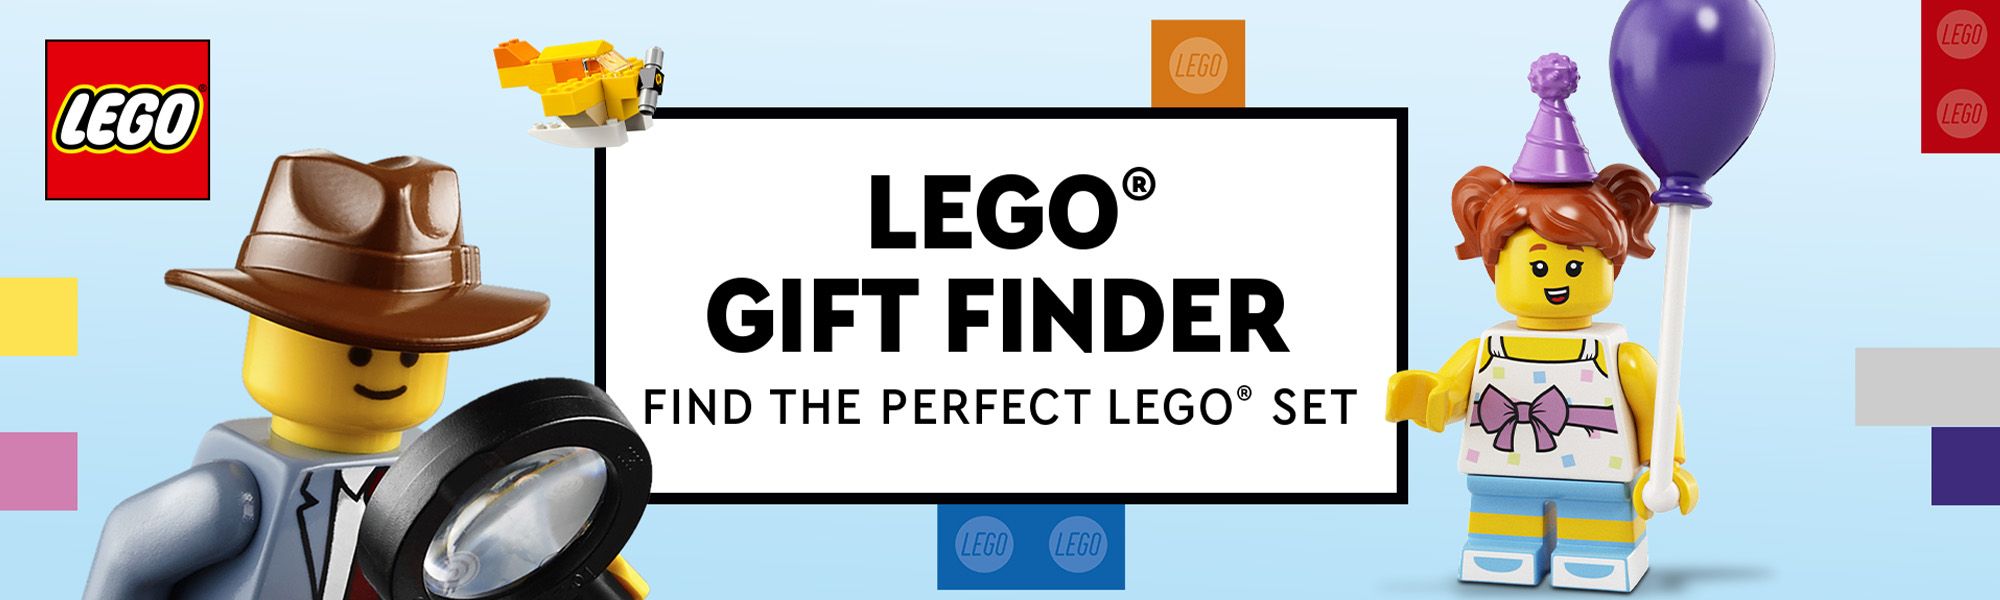 Lego® Gift Finder - Find the perfect Lego® set